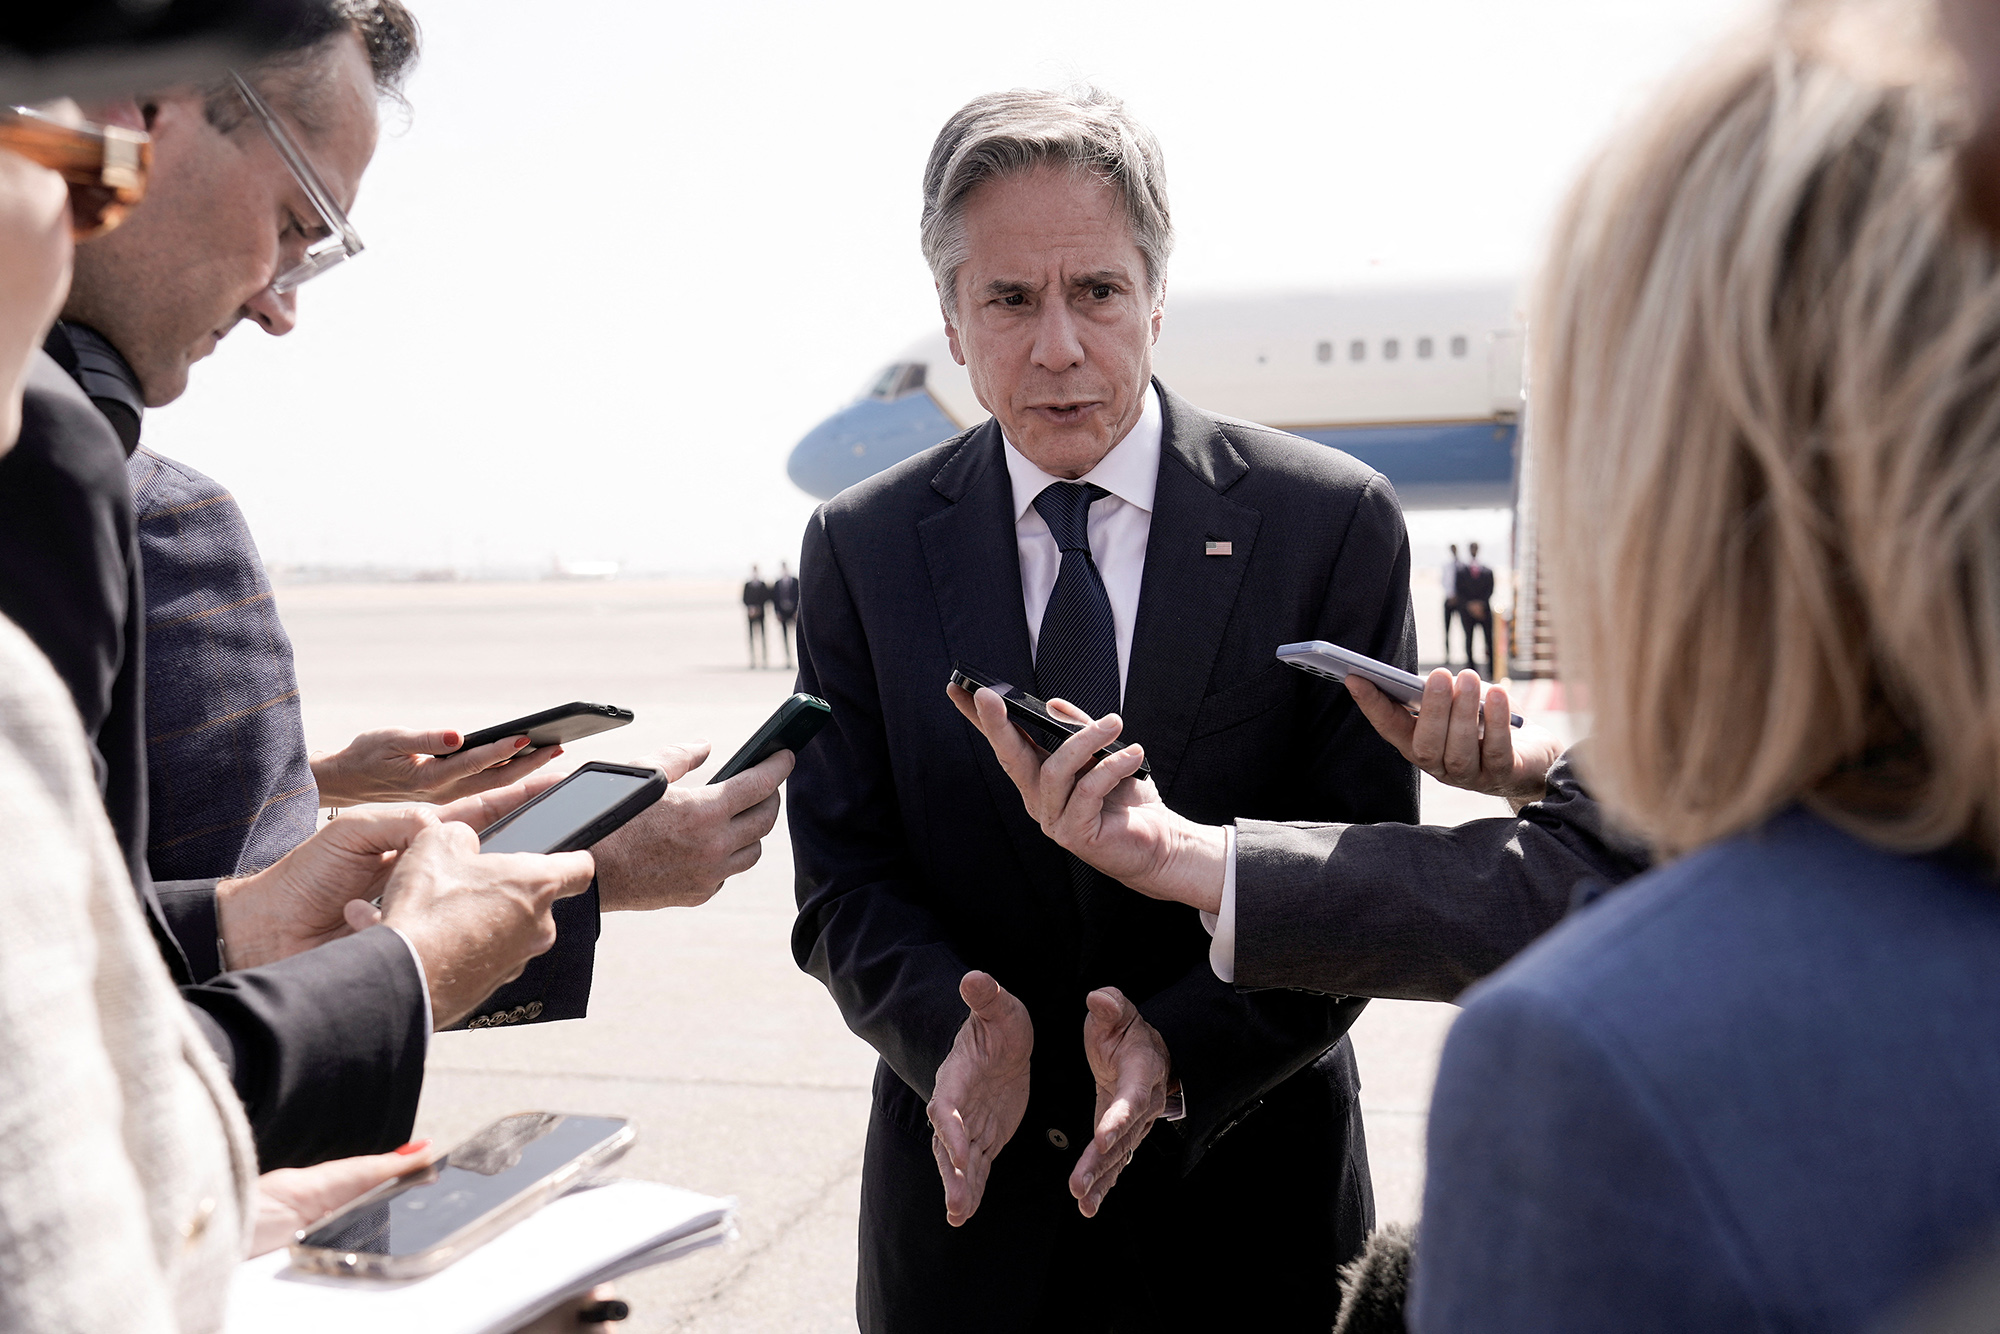 U.S. Secretary of State Antony Blinken speaks to members of the media after meeting with Egyptian President Abdel Fattah al-Sisi, at Cairo airport, Egypt, on June 10.